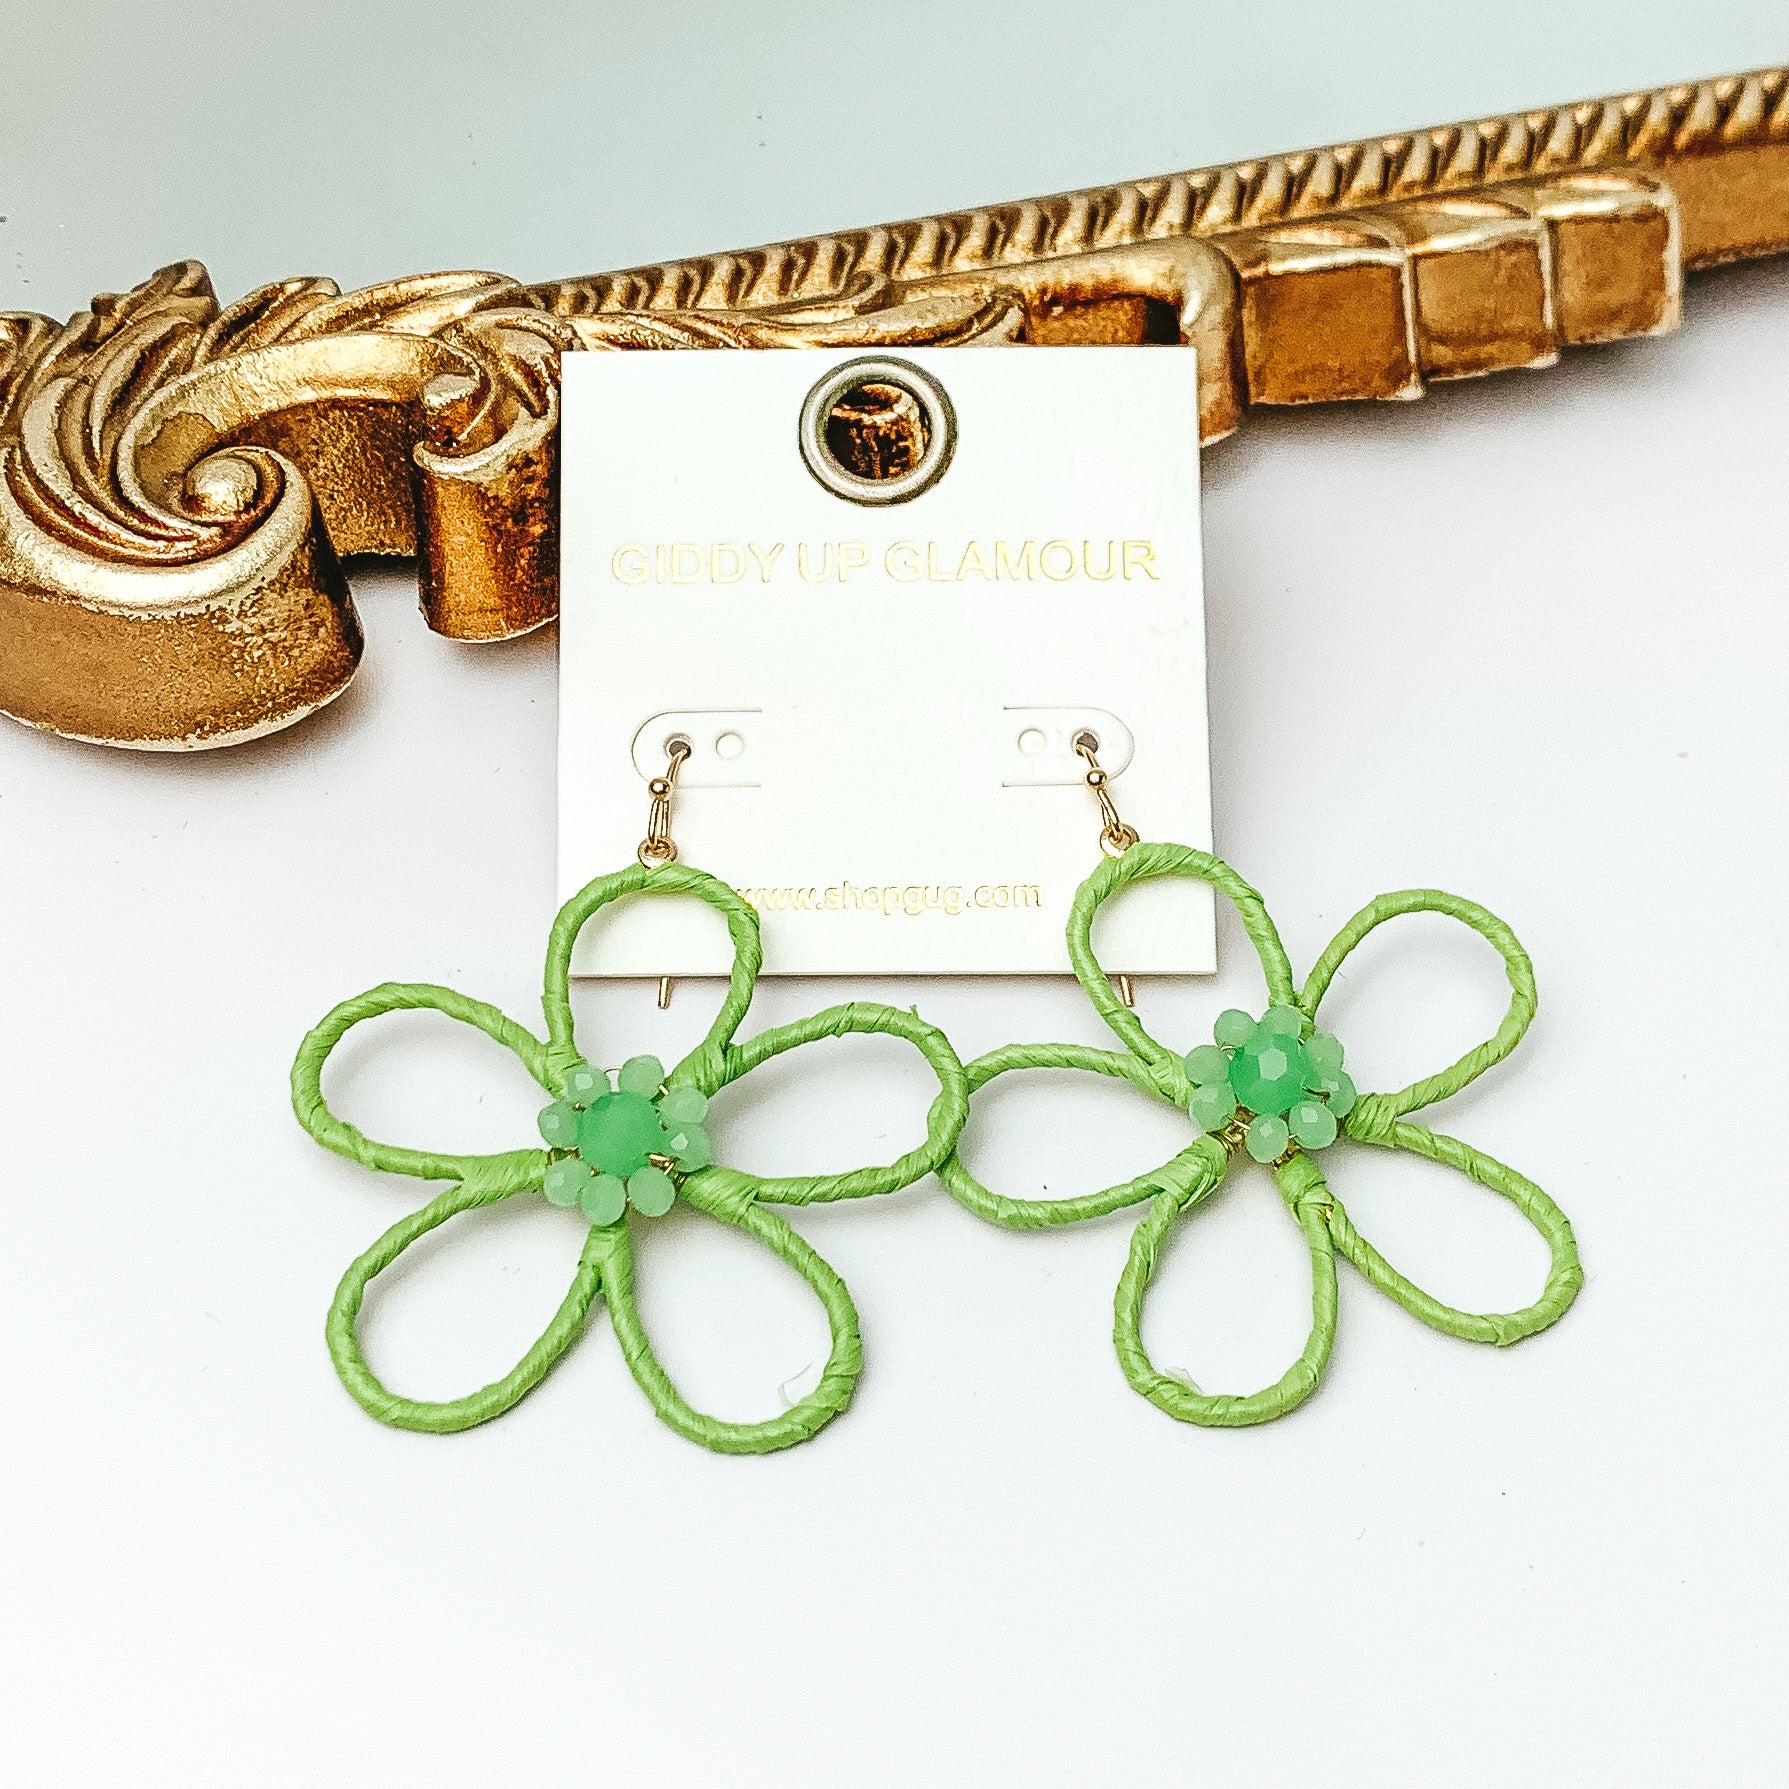 Pictured are gold fish hook earrings with a flower outline pendant. This pendant is pale green and has center pale green crystals. These earrings are pictured in front of a gold mirror on a white background. 